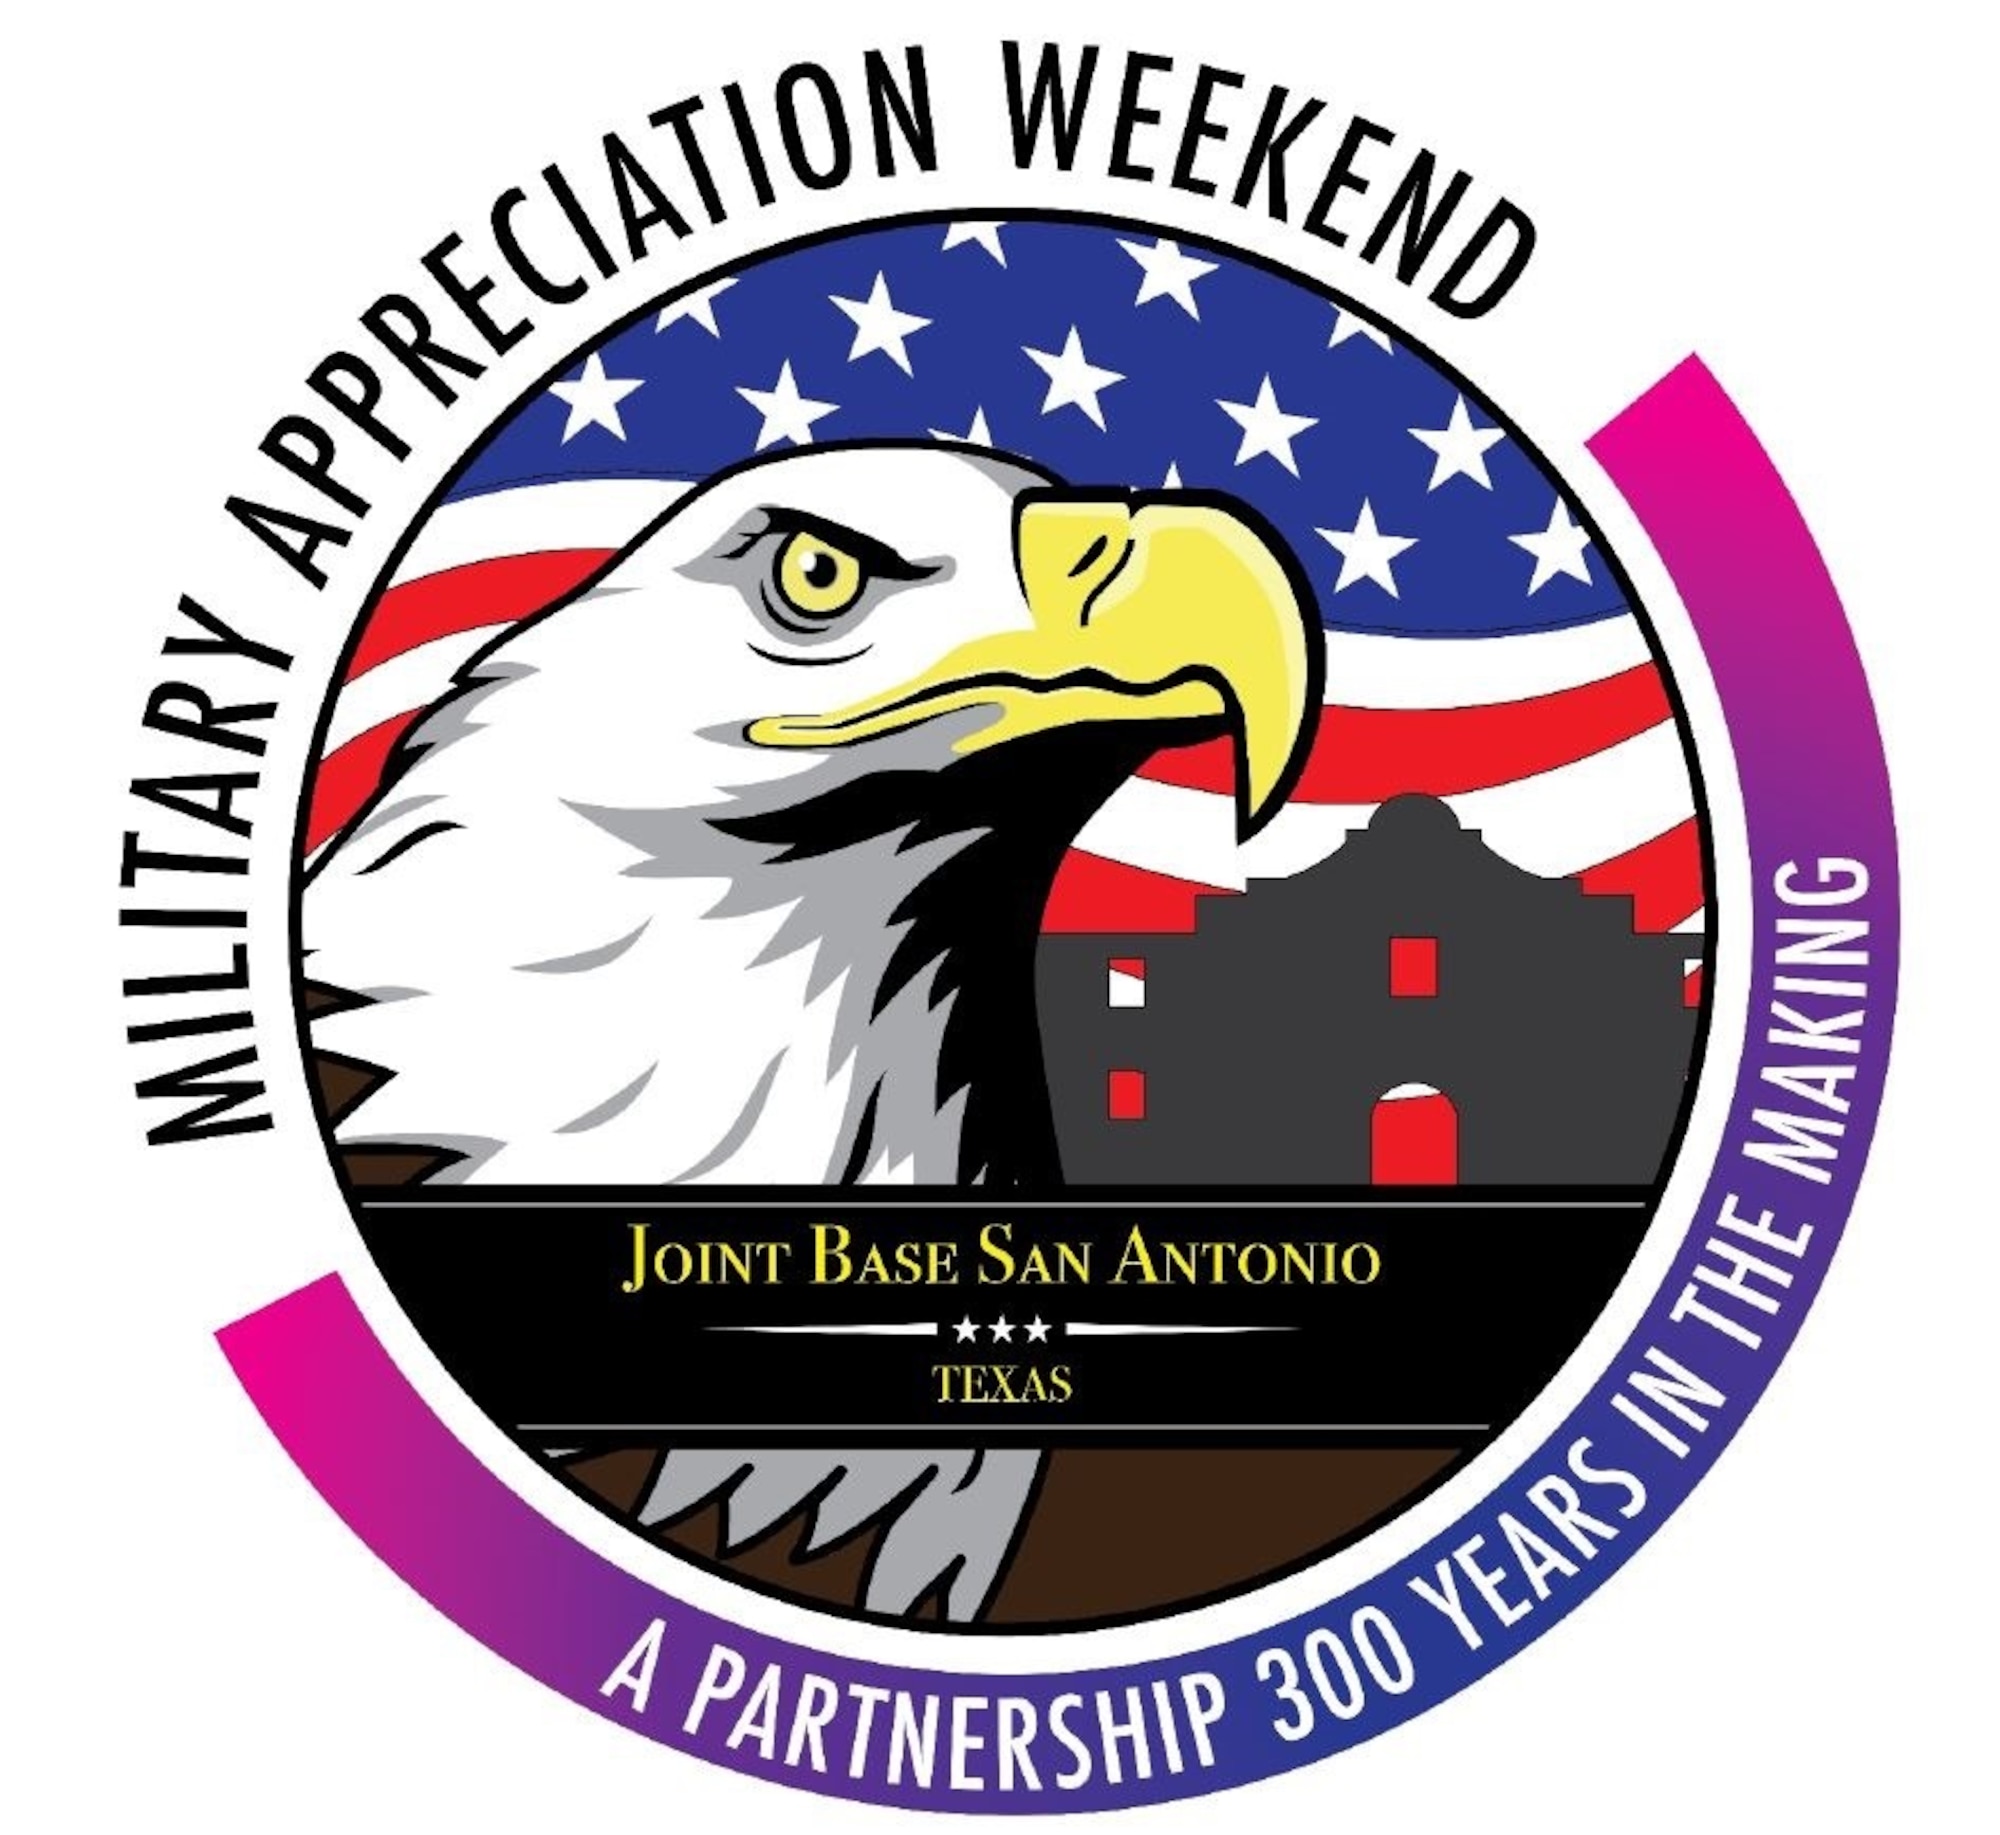 Military Appreciation Weekend at JBSA-Fort Sam Houston is planned for May 5-6, and will feature live music, rides, arts and crafts, military demonstration teams, historic tours and a polo match. The weekend will open with a 5K race on Saturday and conclude with a live music concert and fireworks on Sunday.